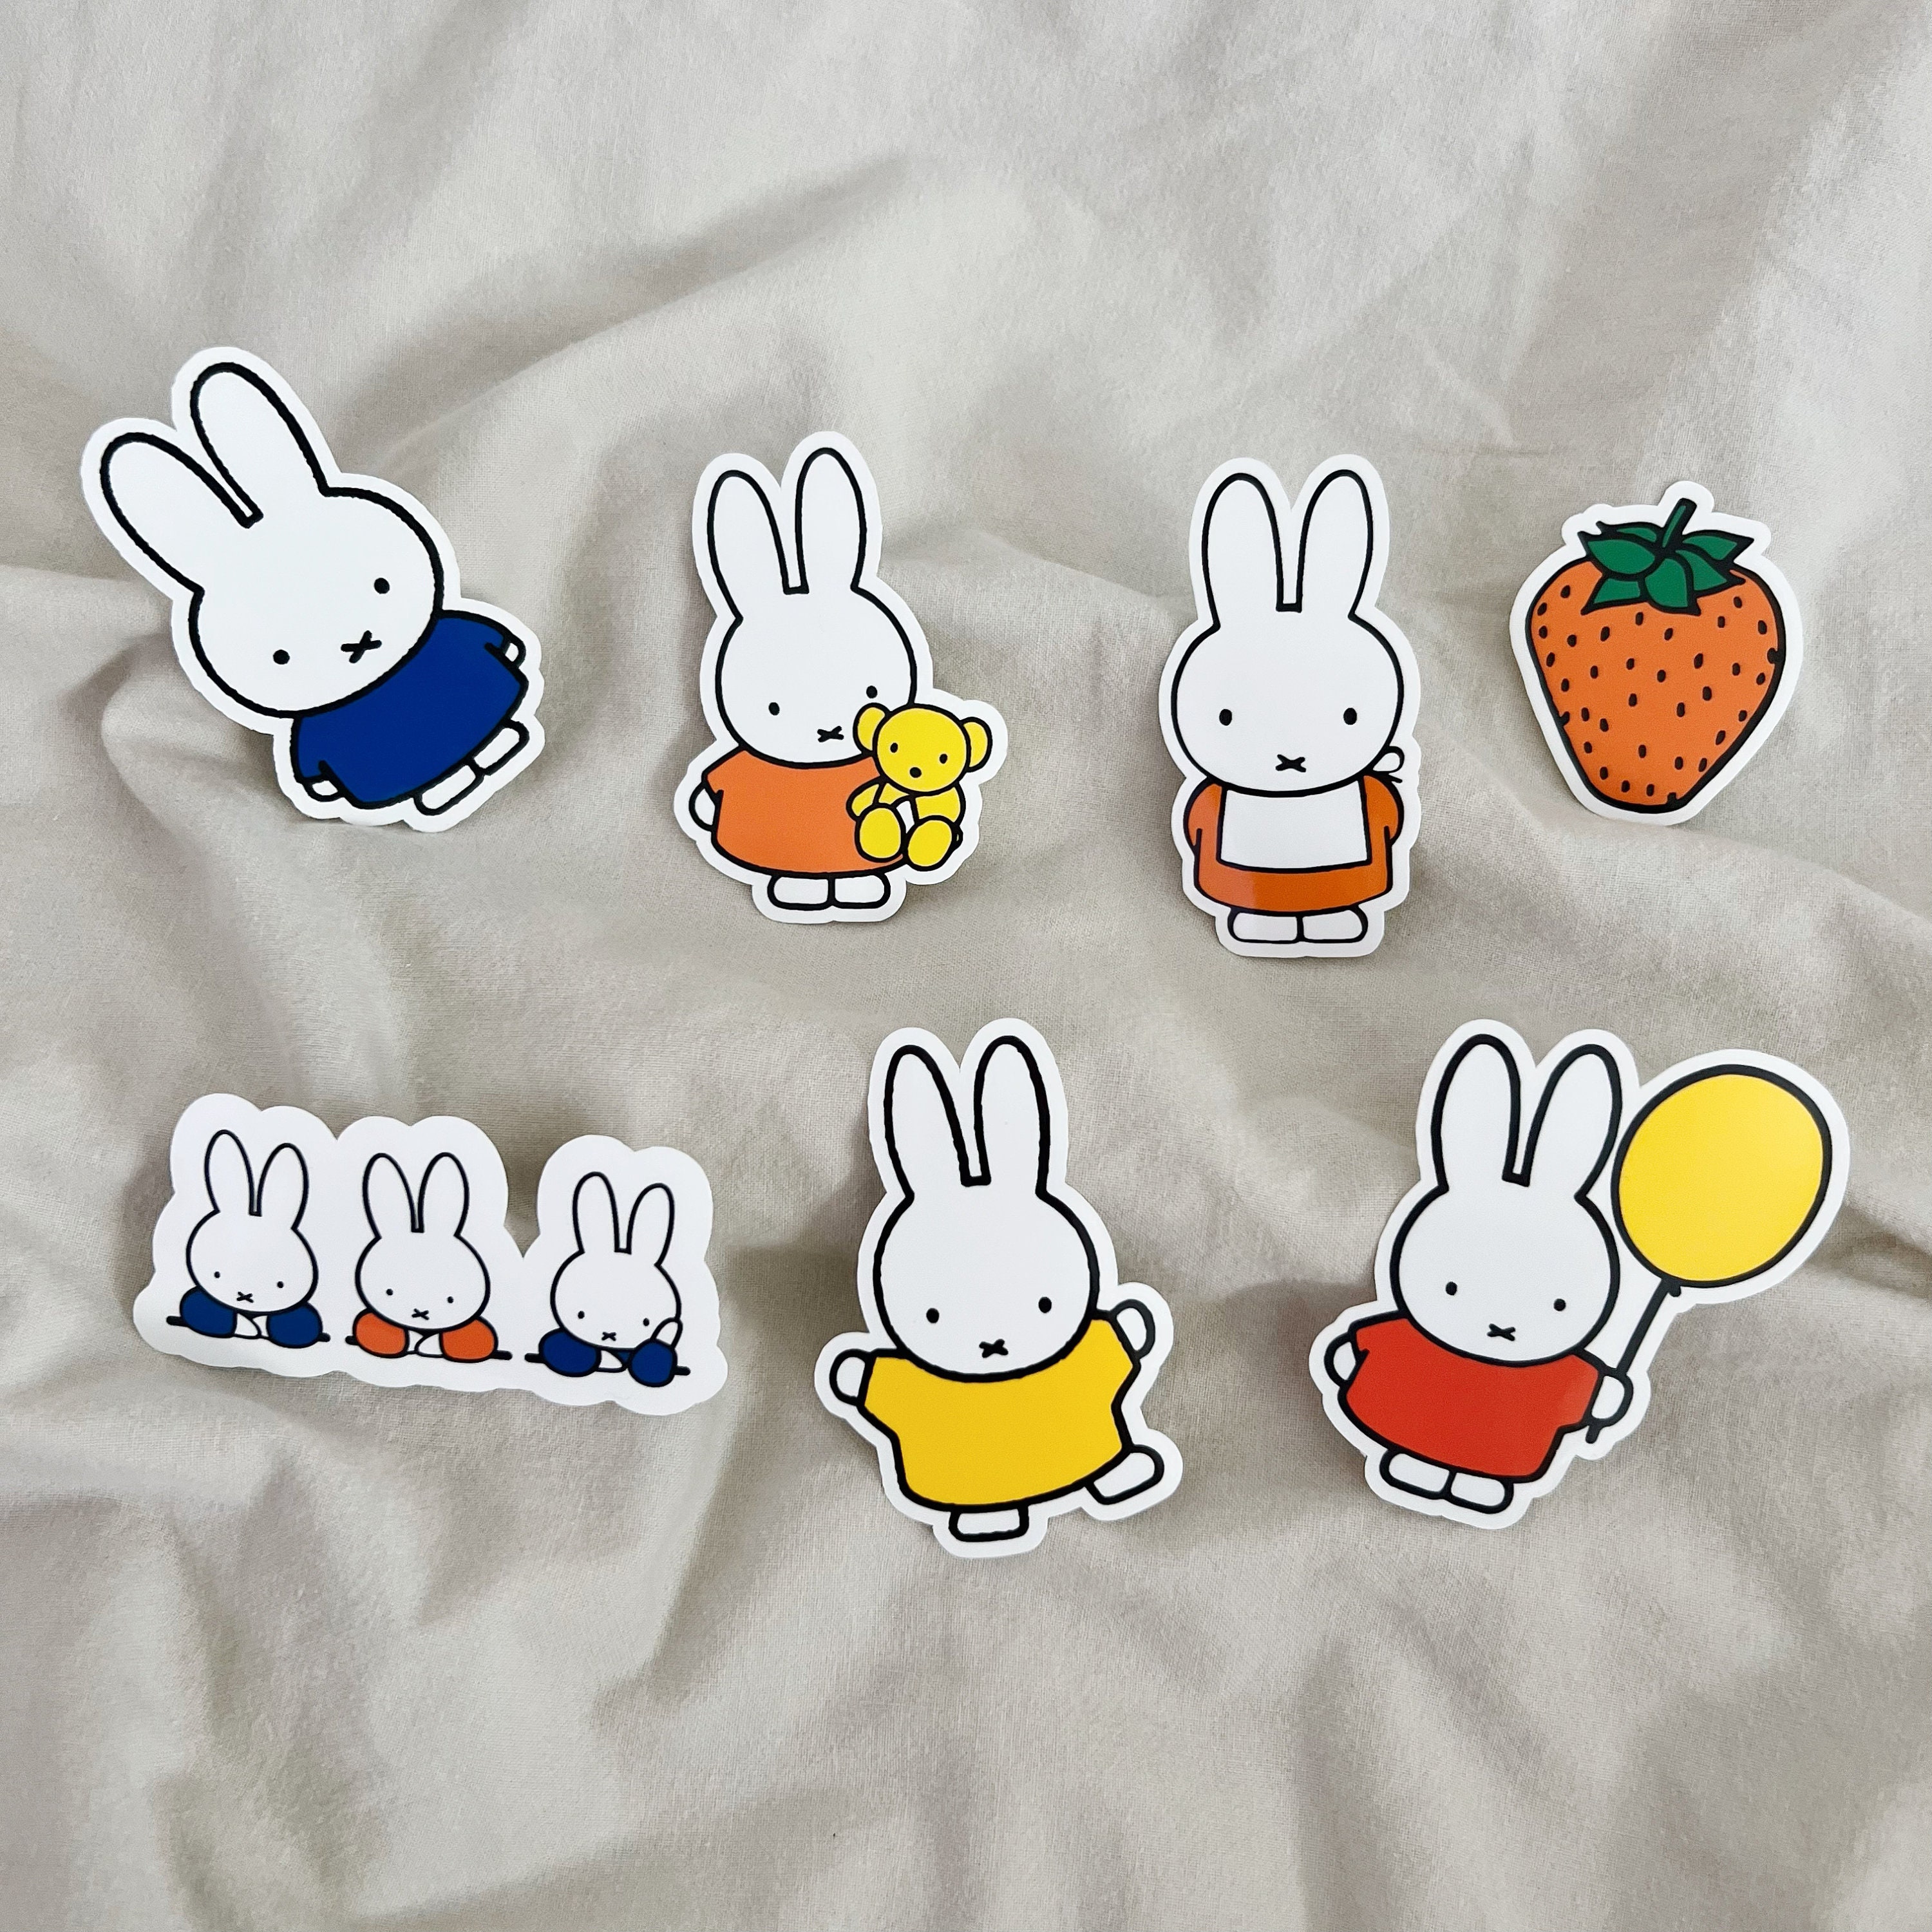 50 Miffy Bunny Envelope Seals / Labels / Stickers, 1 x 1.5